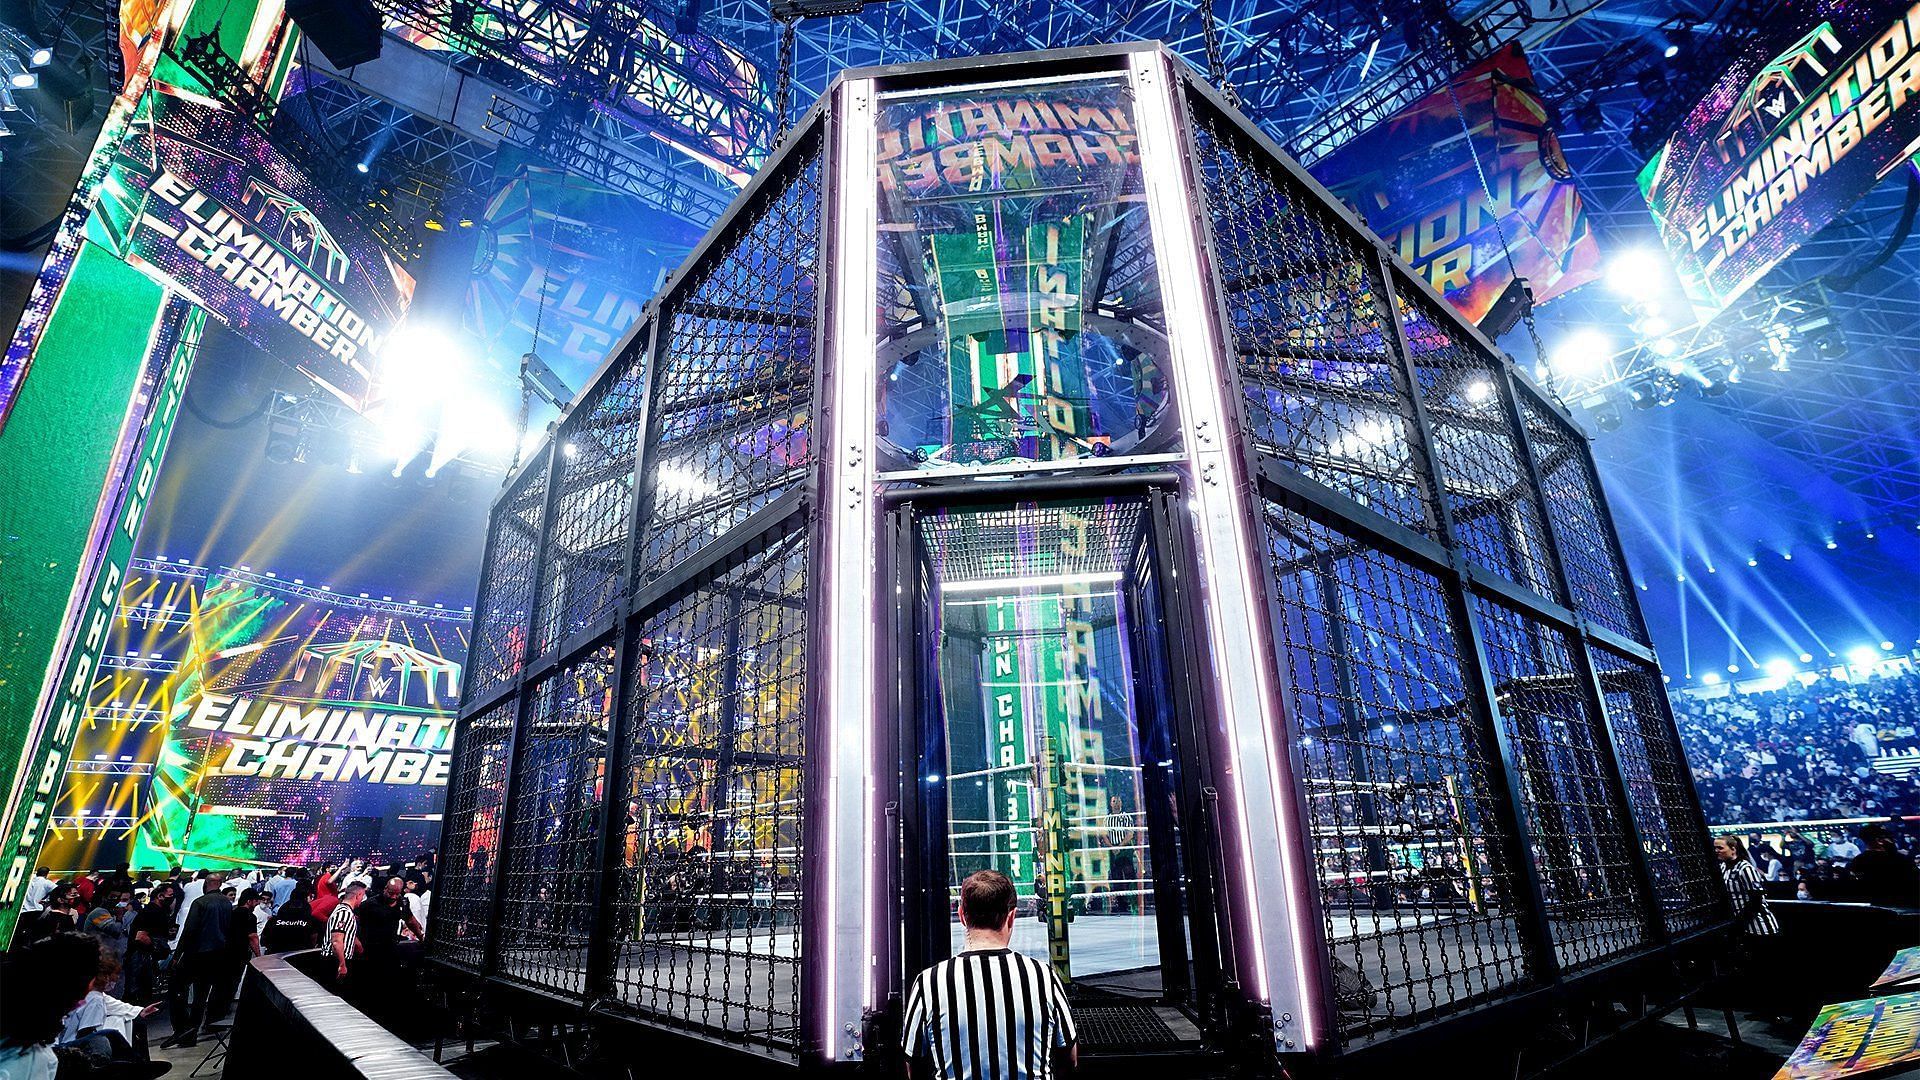 A WWE referee checks on the side door to the Elimination Chamber structure